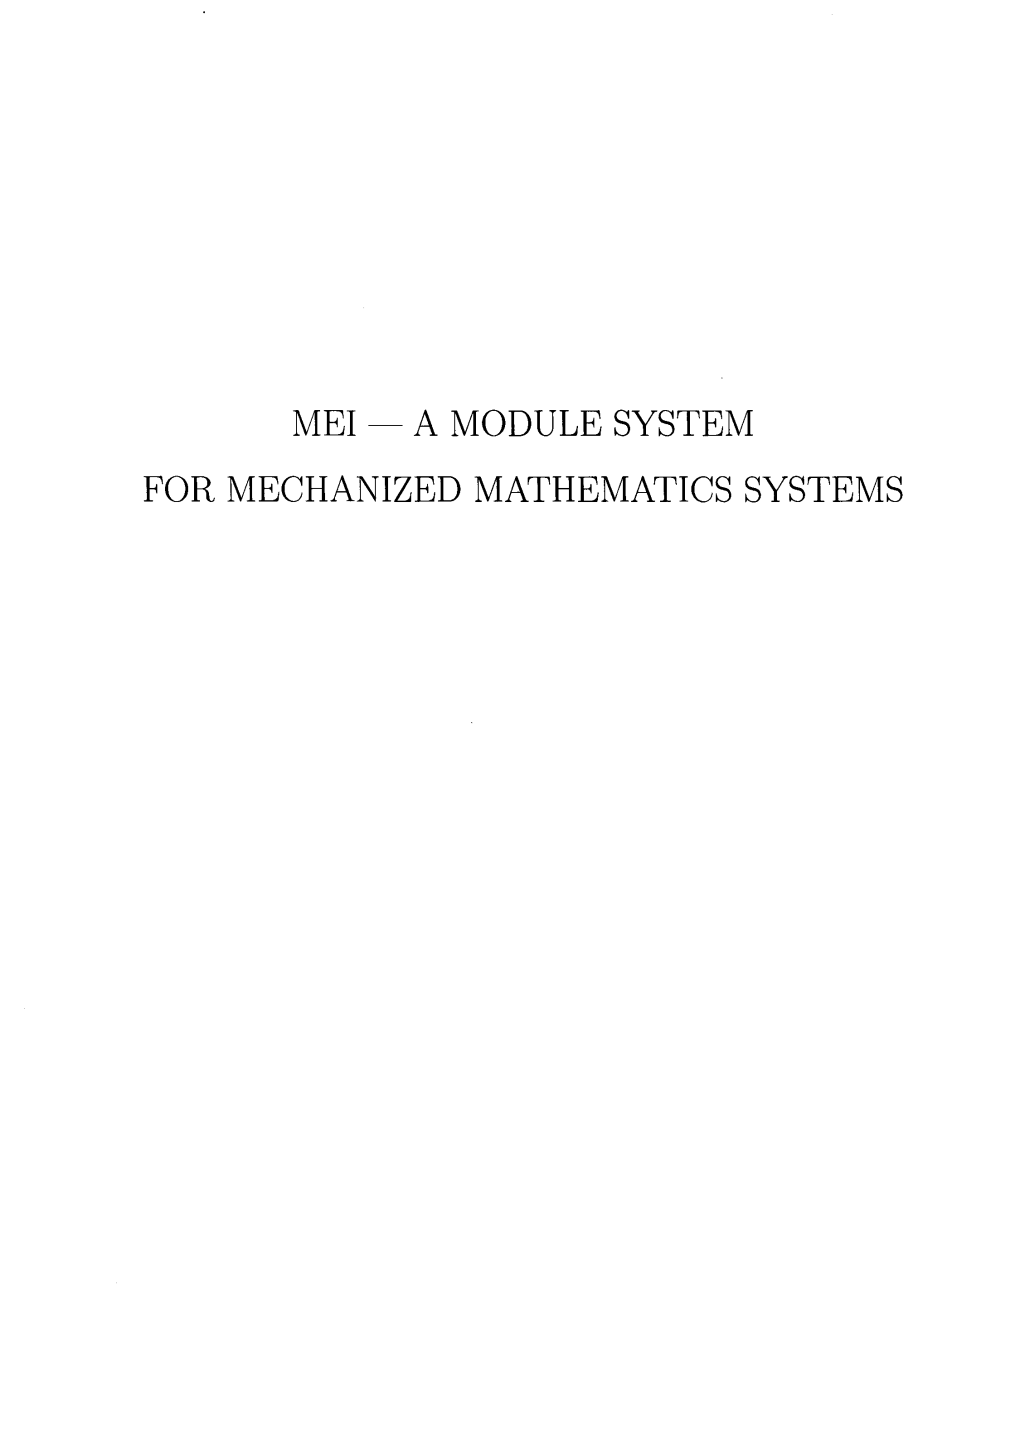 A Module System for Mechanized Mathematics Systems Mei - a Module System for Mechanized Mathematics Systems